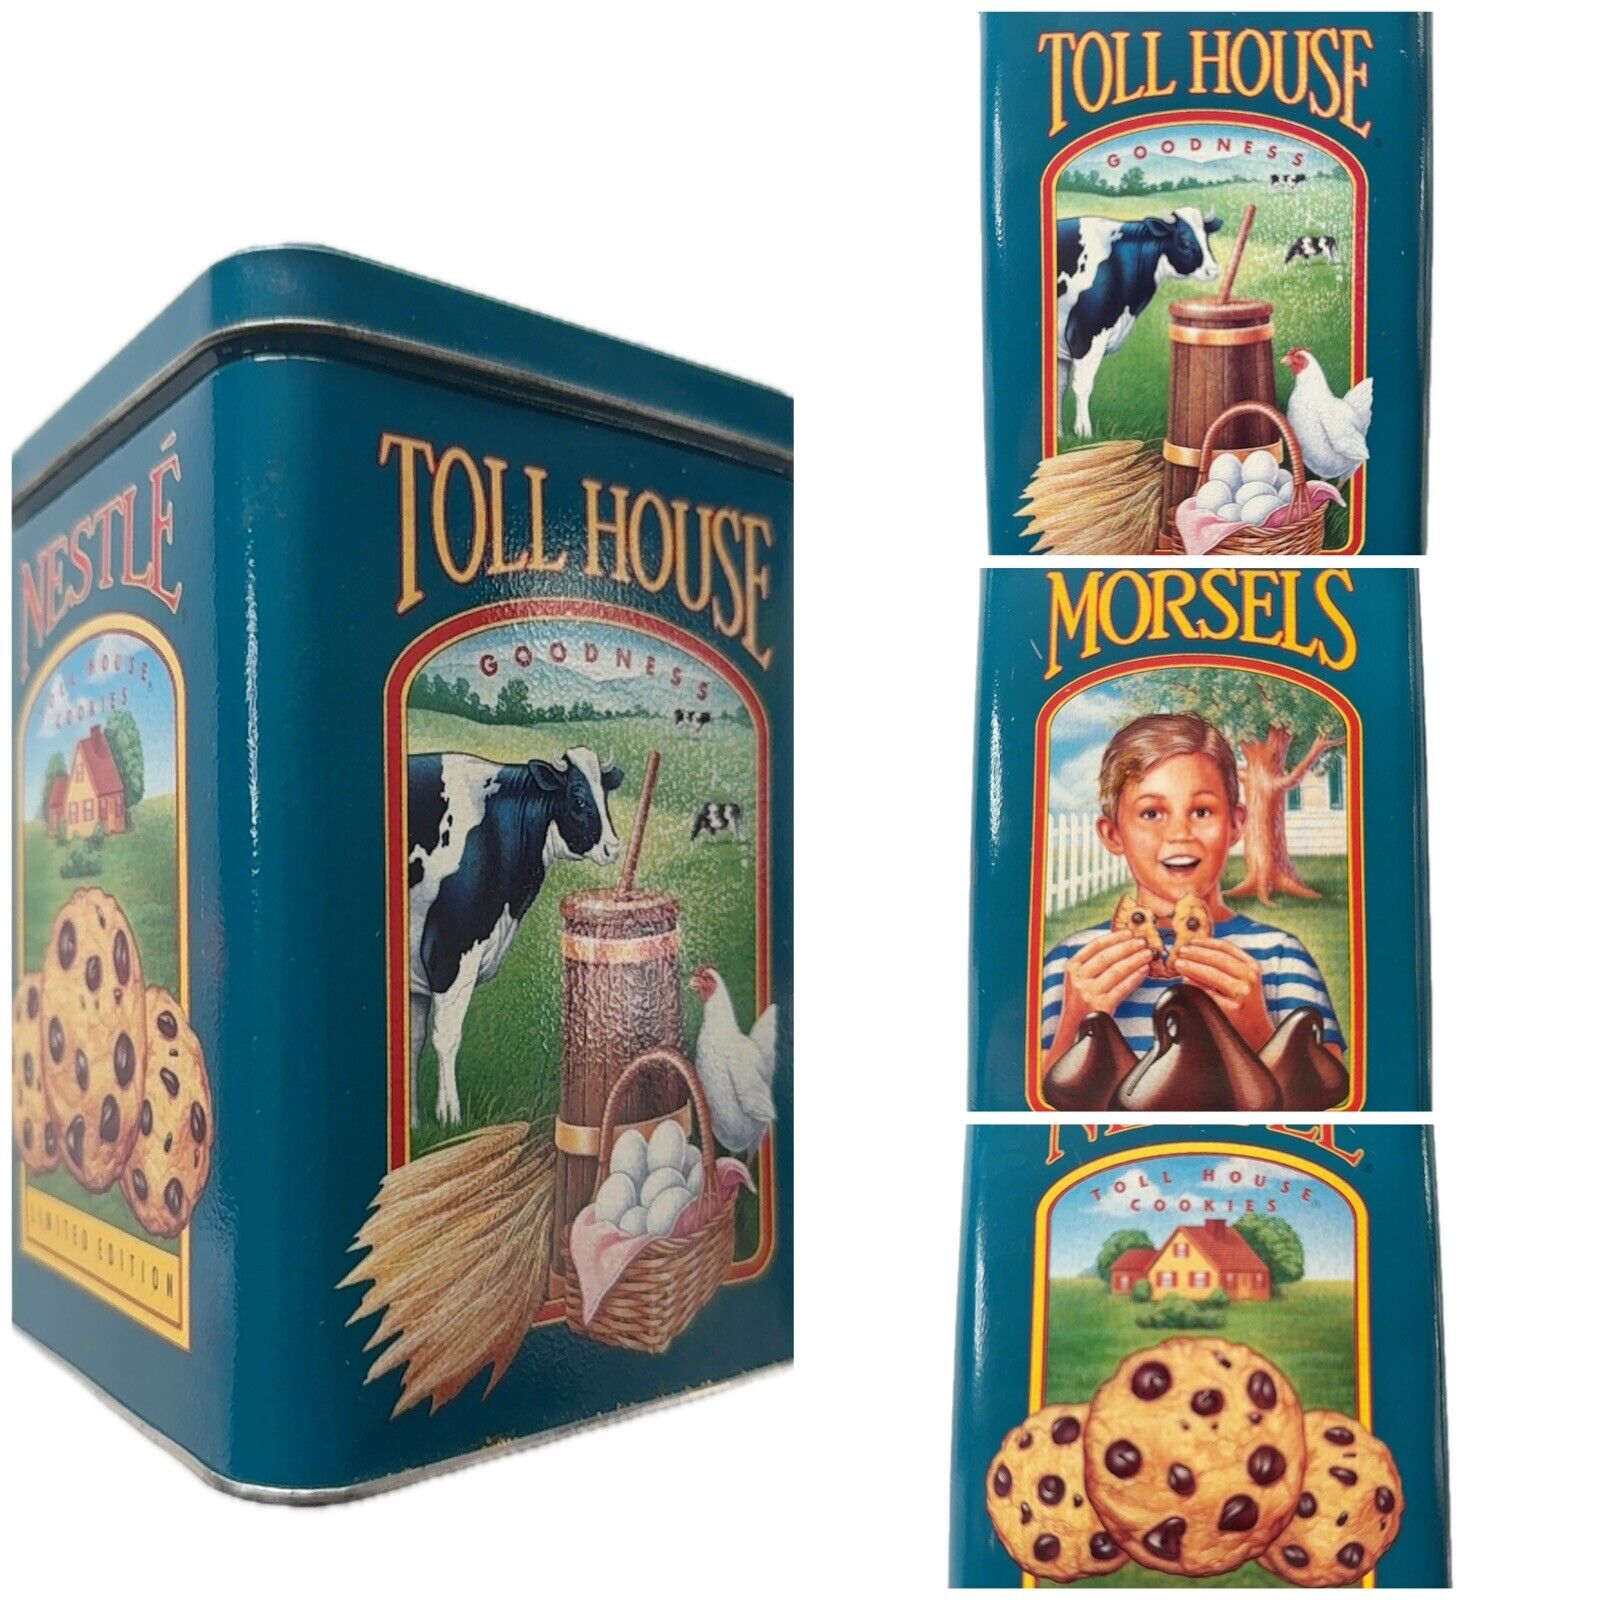 Nestle Toll House Tin Limited Edition Cookies Morsels Farm Cow Chicken Vintage